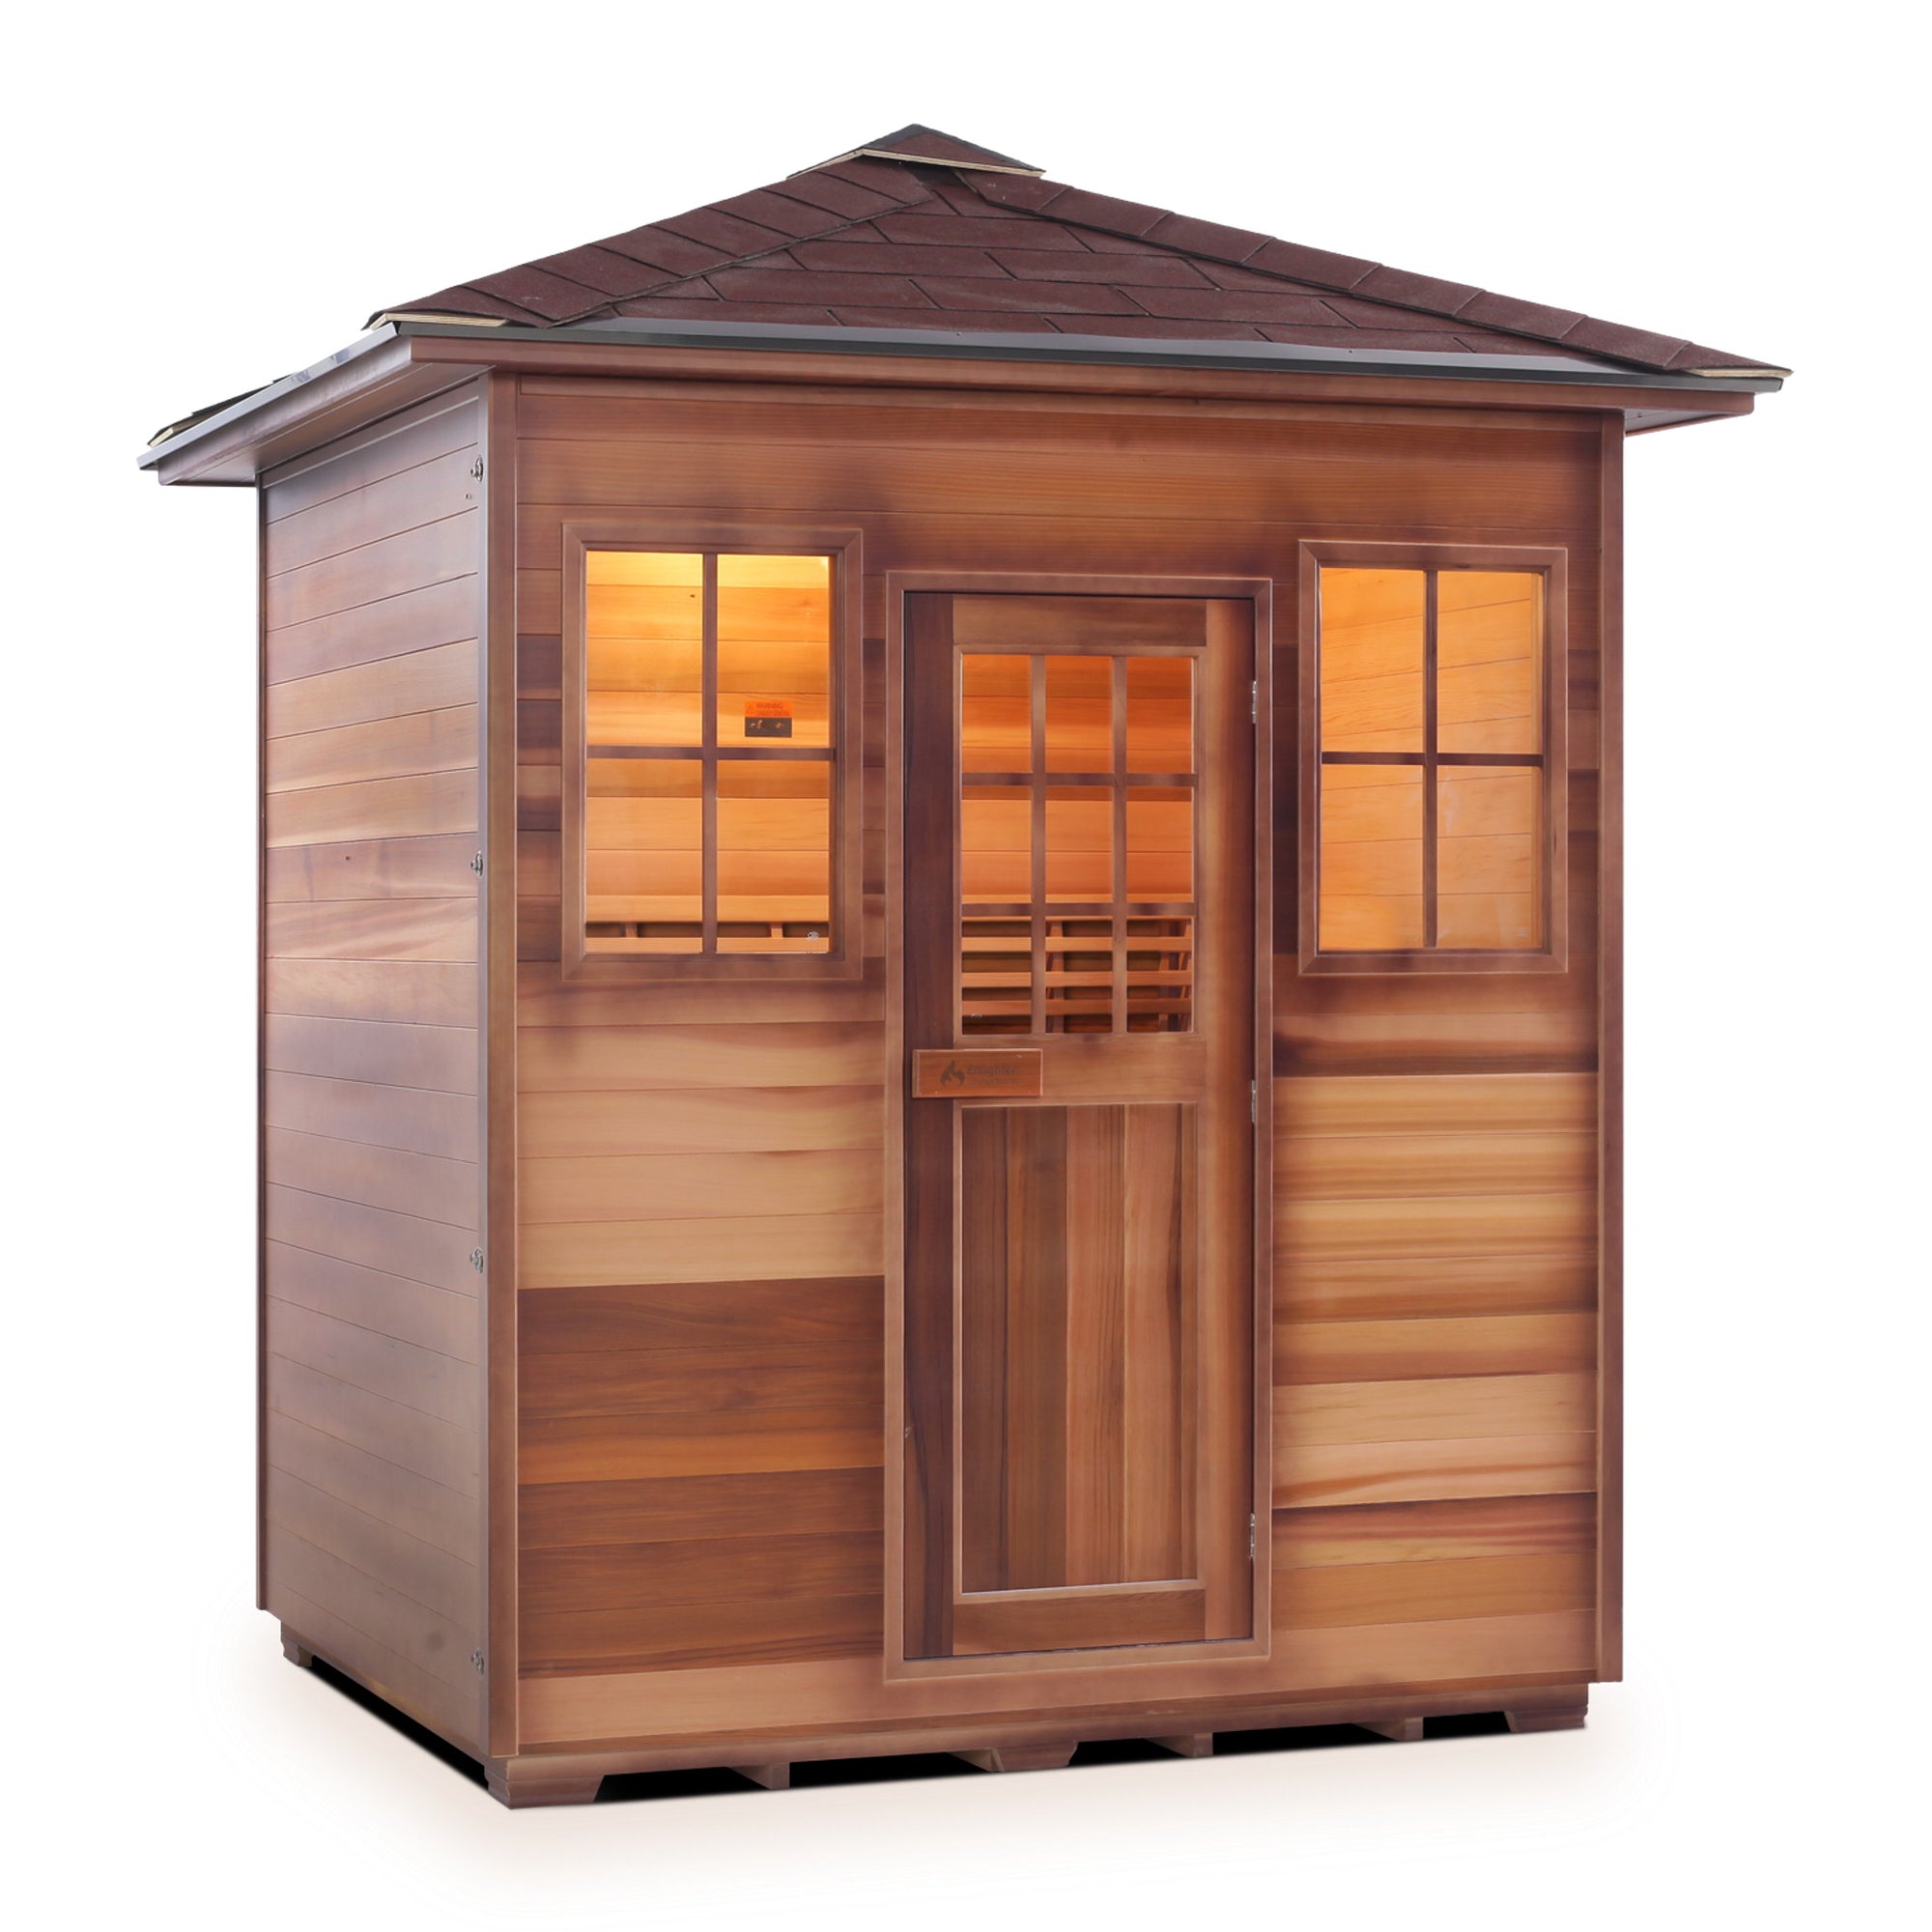 Enlighten sauna SaunaTerra Dry Traditional MoonLight 4 Person Outdoor Sauna Canadian Red Cedar Wood Outside And Inside Double Roof ( Flat Roof + peak roof) front view